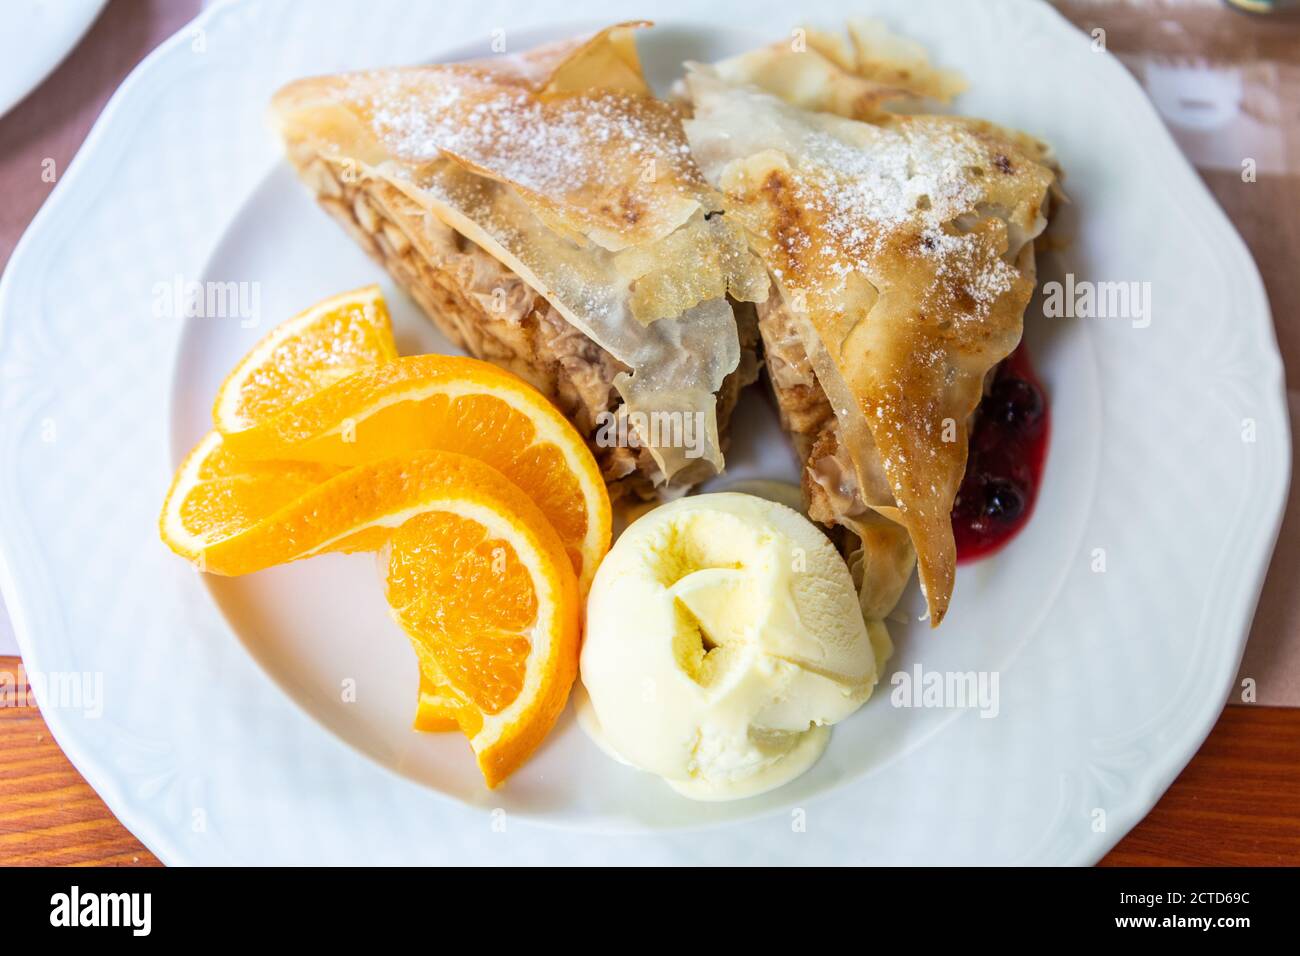 Plate of apple strudel in Hungary. Stock Photo